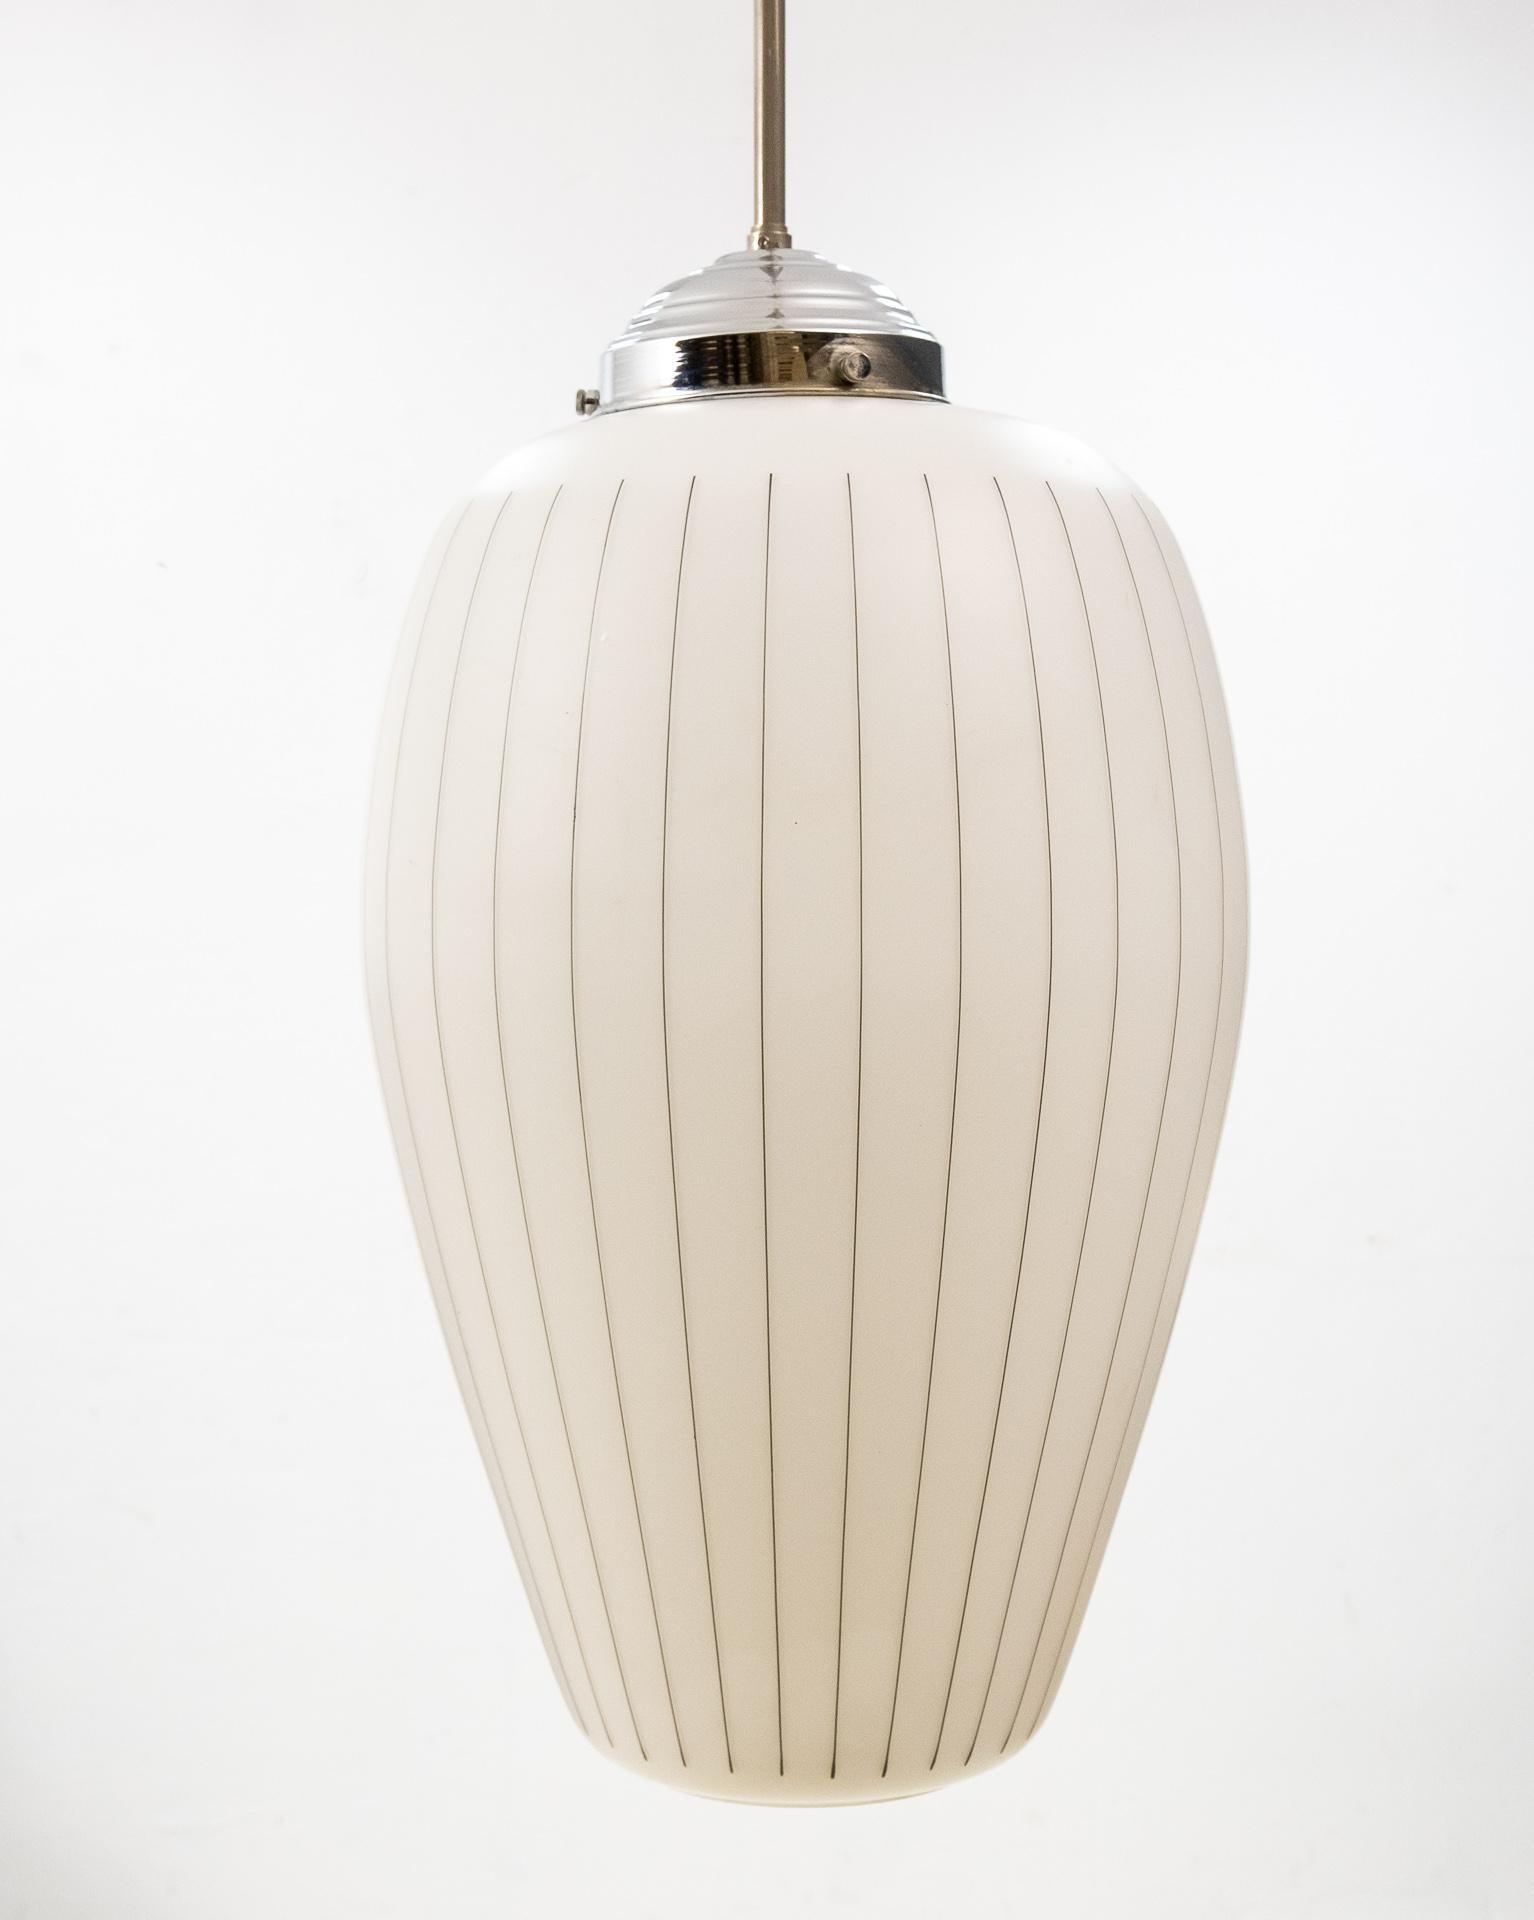 Very nice vintage pendant lamp. Chrome base, comes with an opaline glass shade.
With a tin black striping.